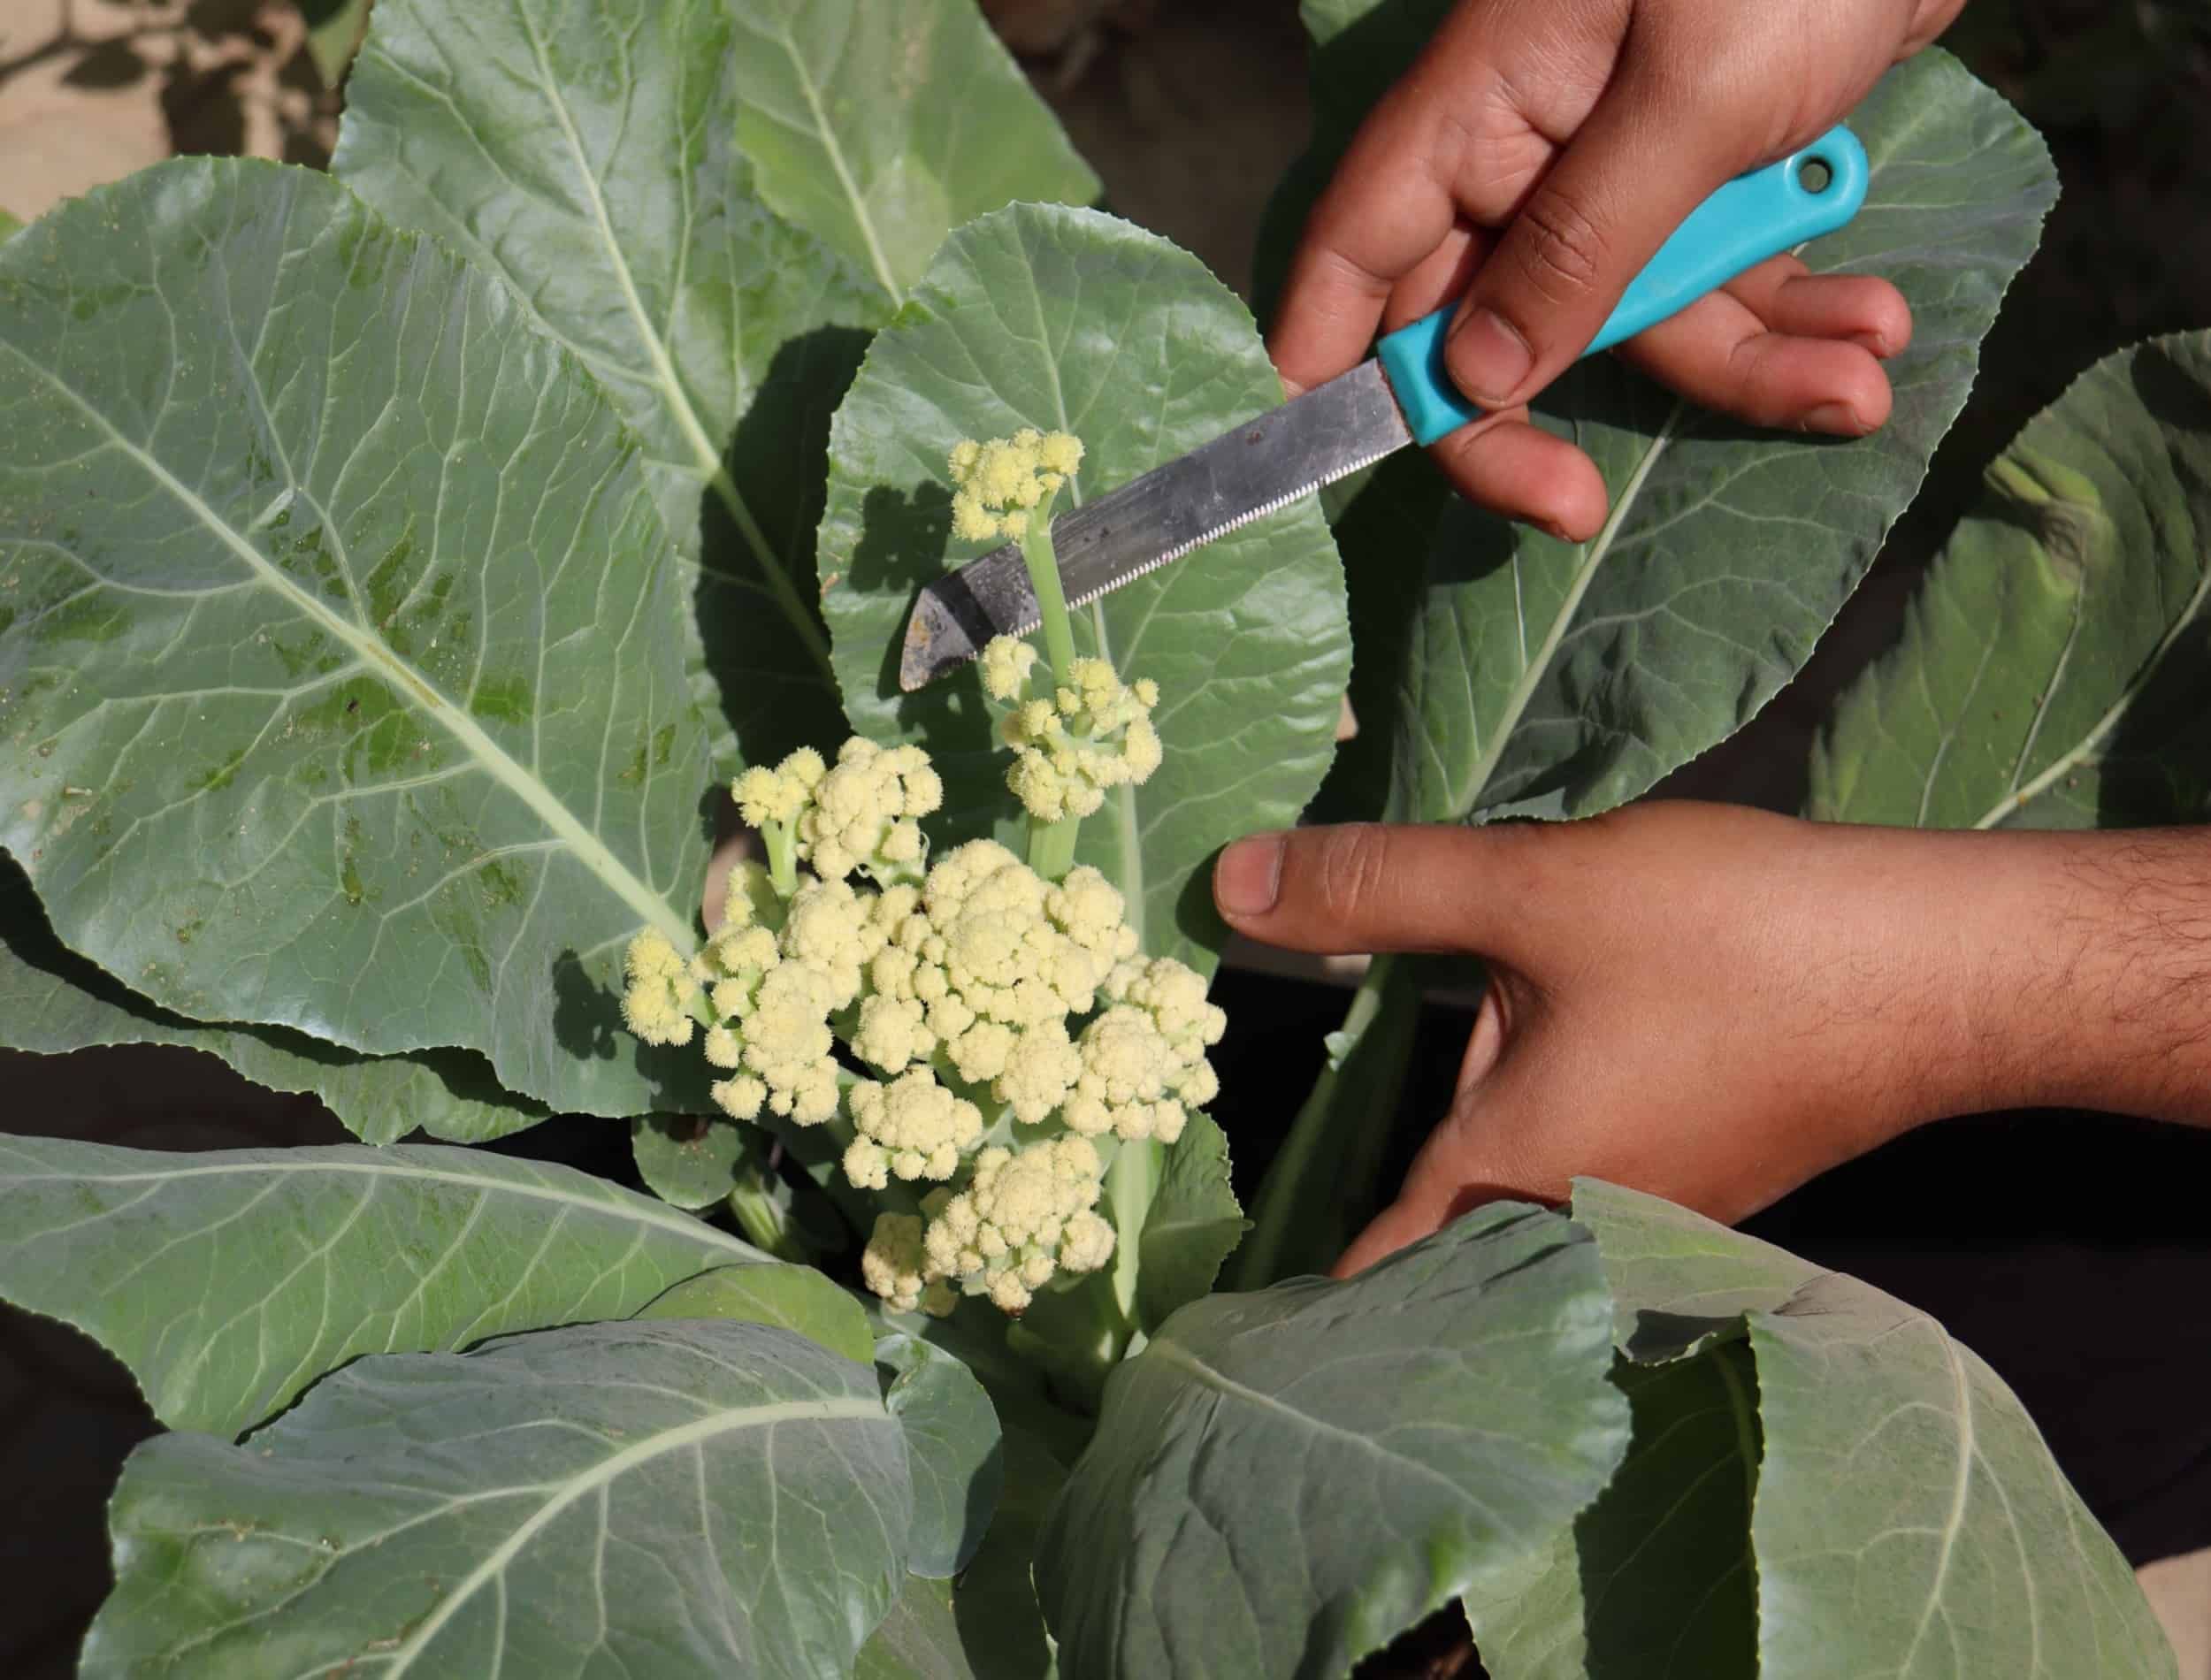 Harvesting and chopping big leafy organic cauliflower vegetable with bare hands and a kitchen knife.